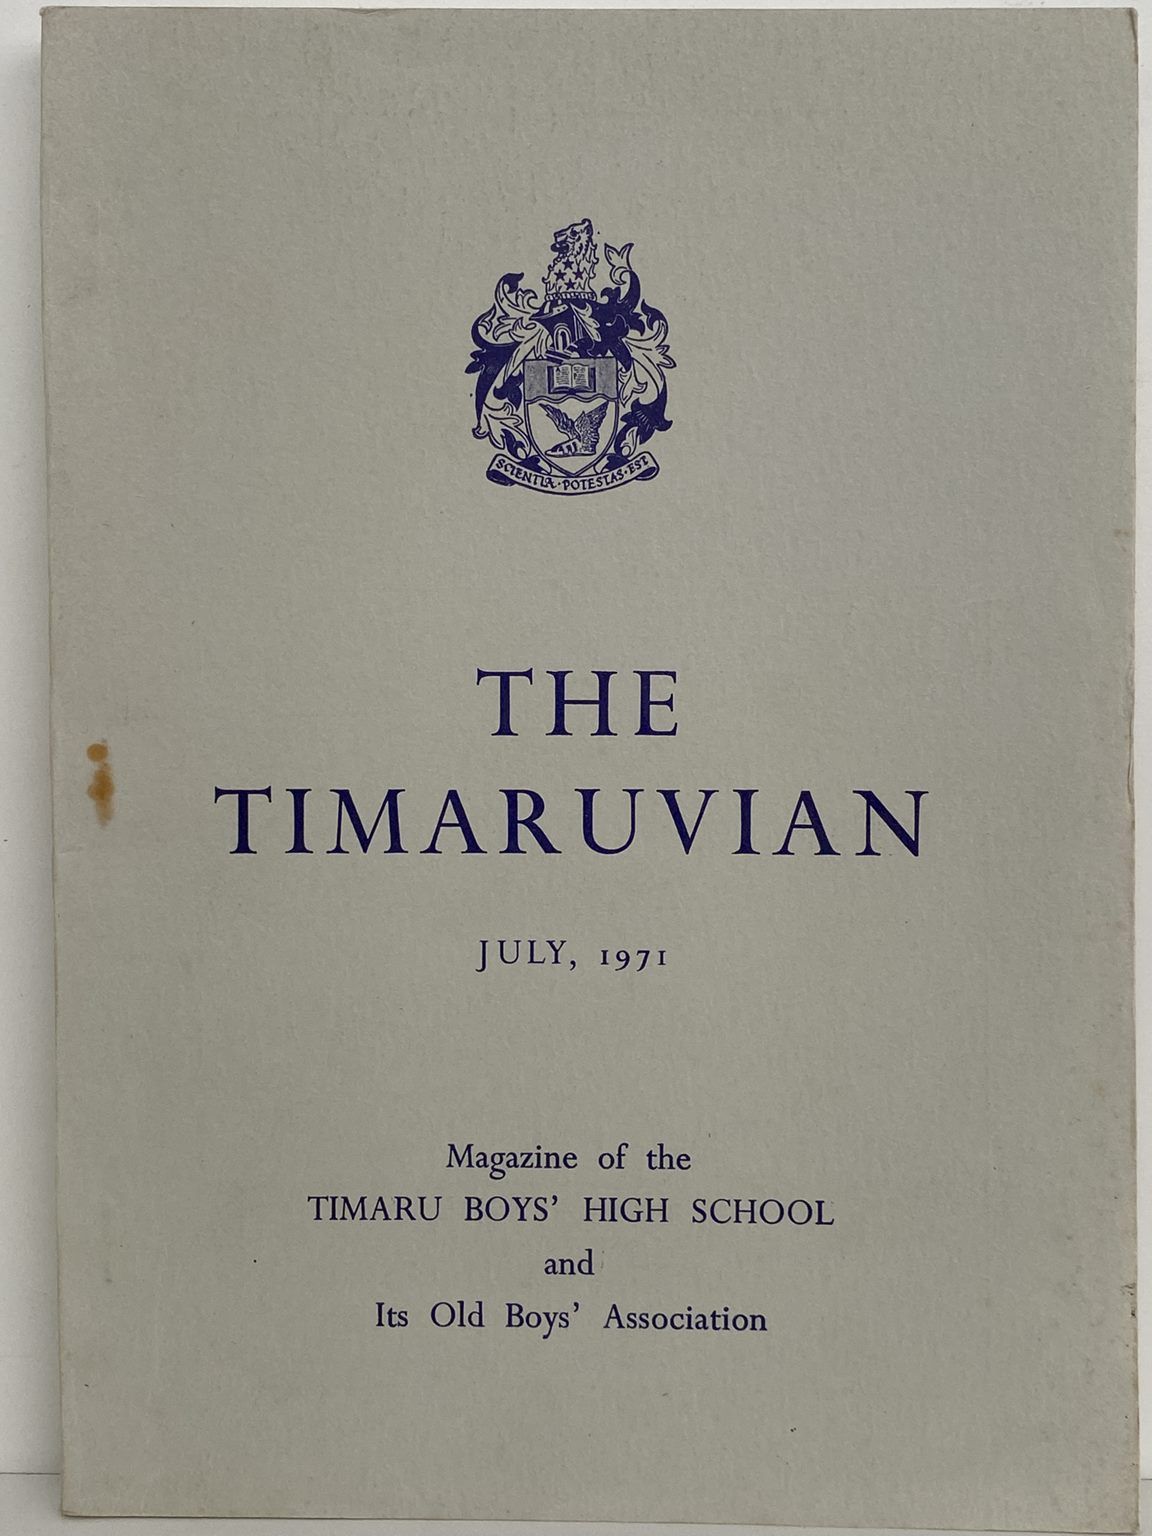 THE TIMARUVIAN: Magazine of the Timaru Boys' High School and its Old Boys' Association 1971